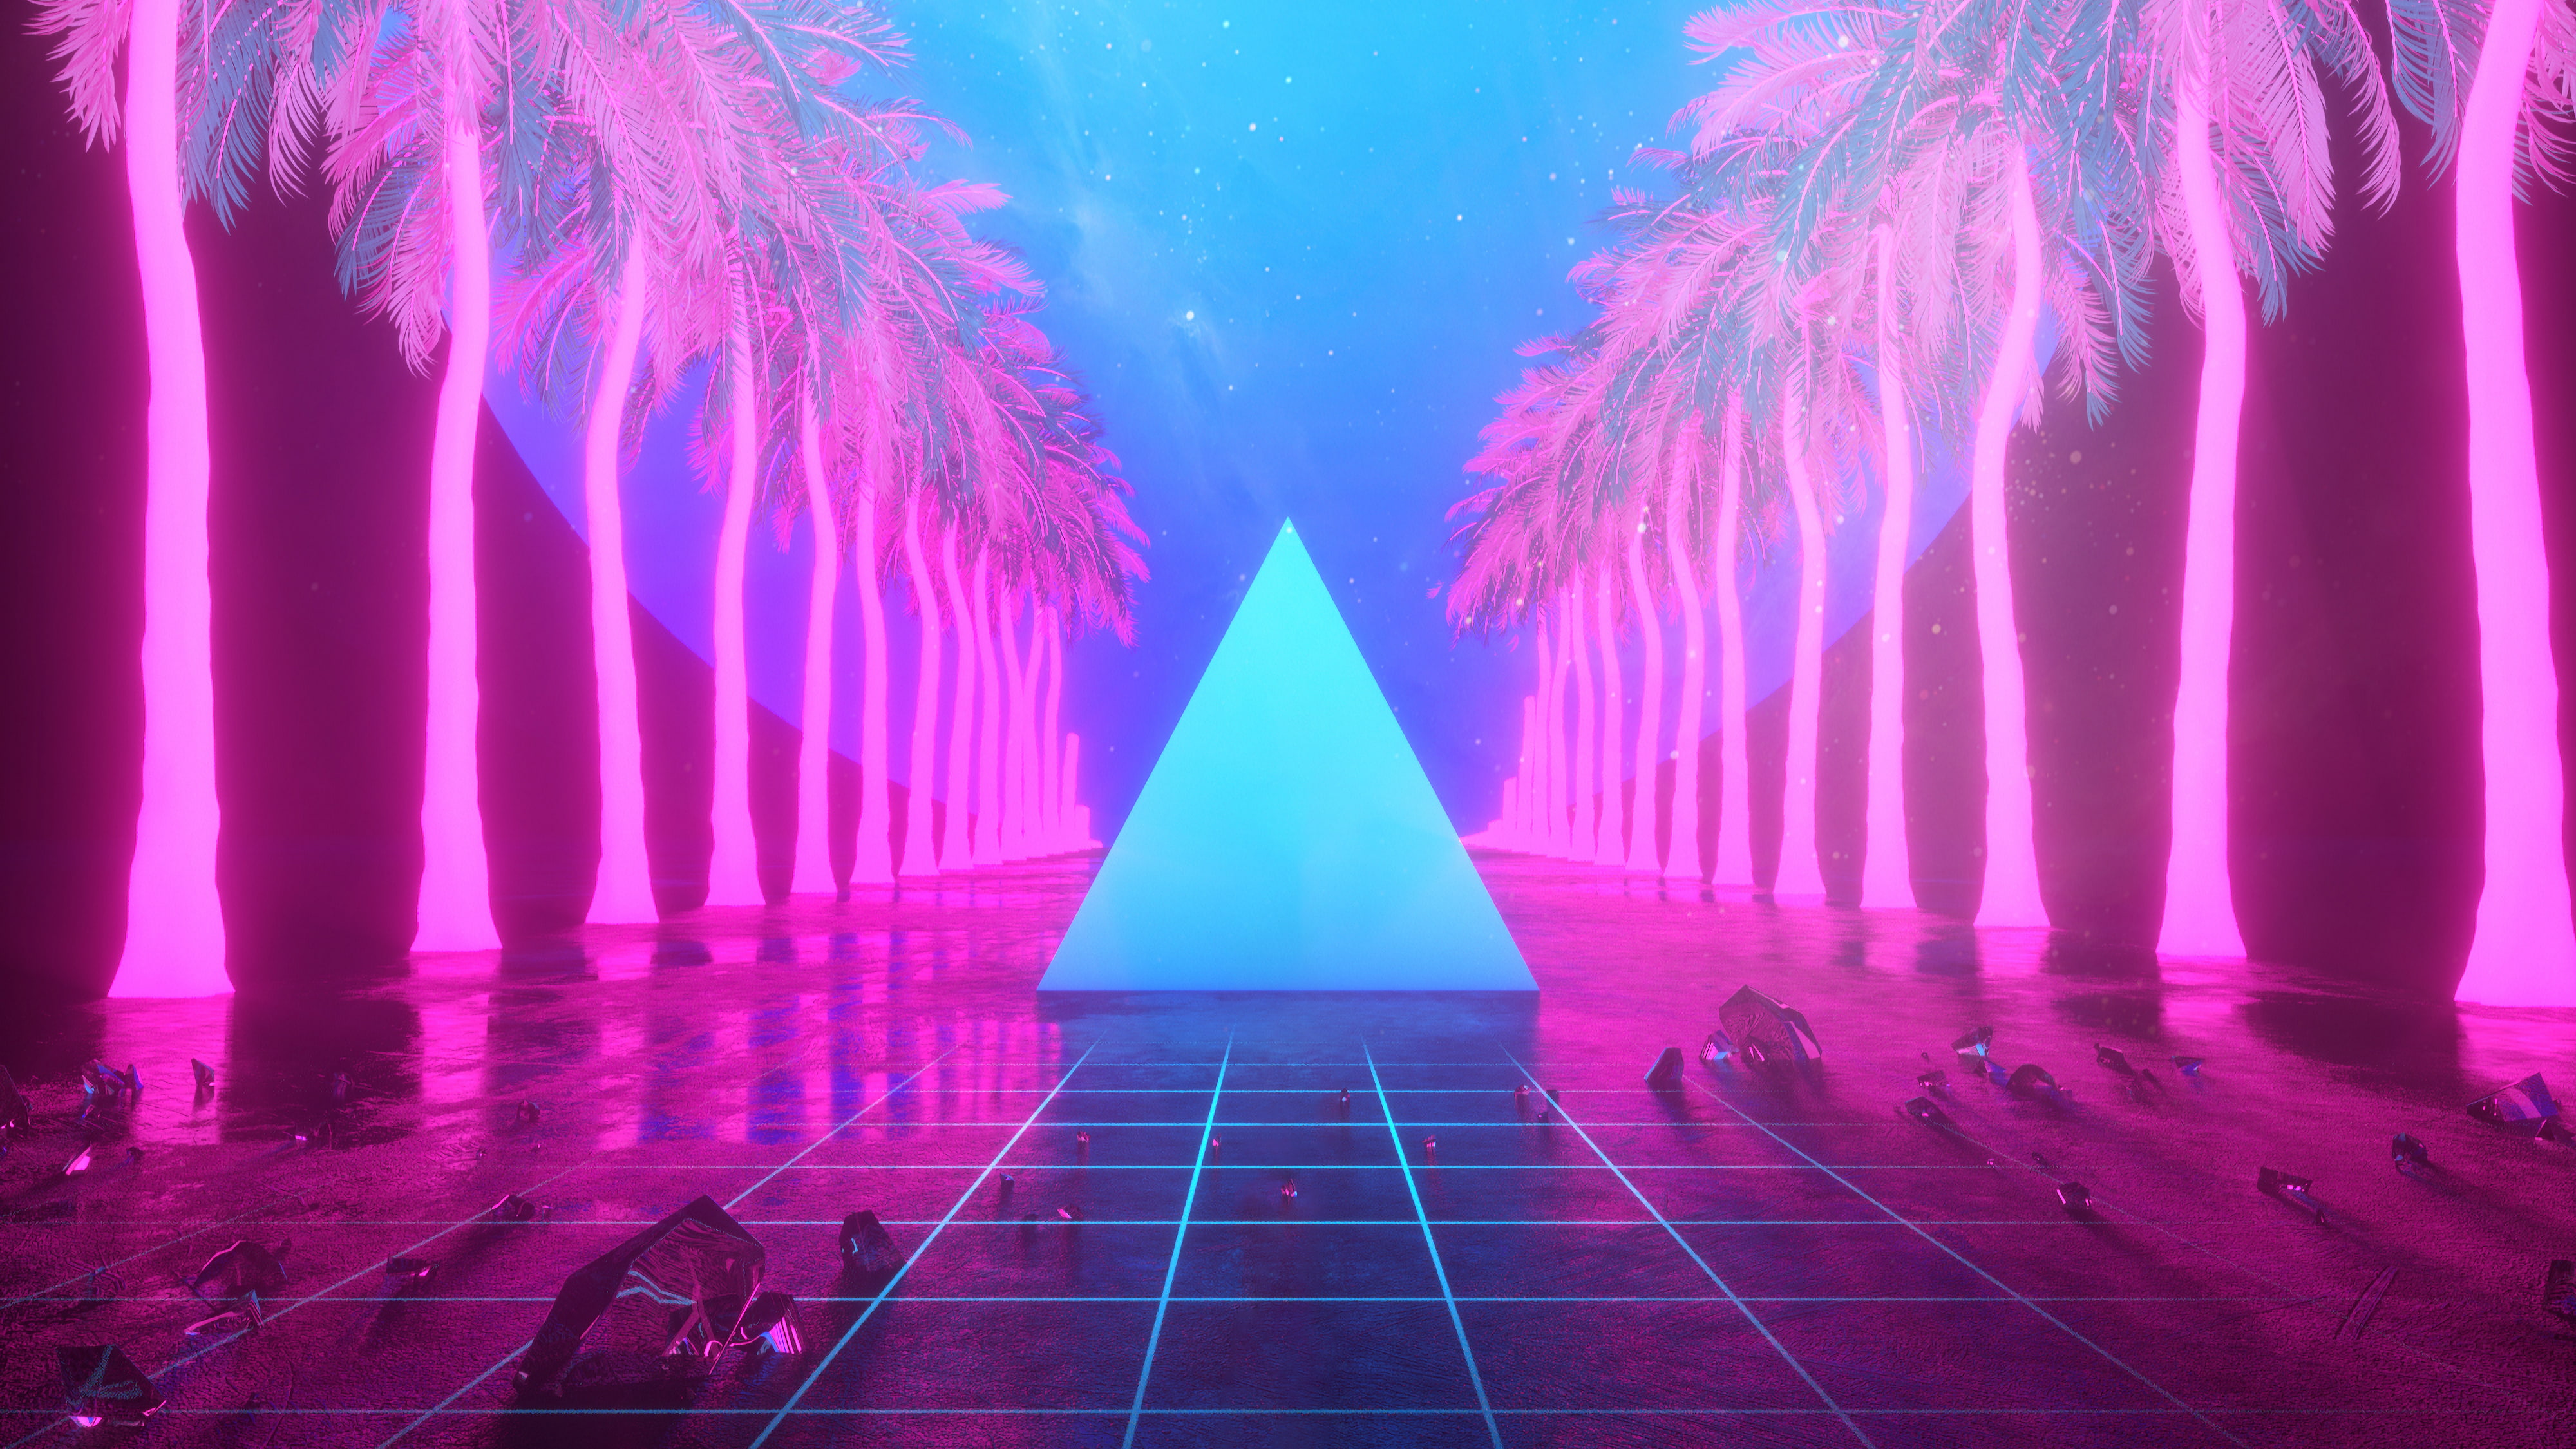 Retro style, vaporwave, abstract, palm trees, pyramid, post post-modernism